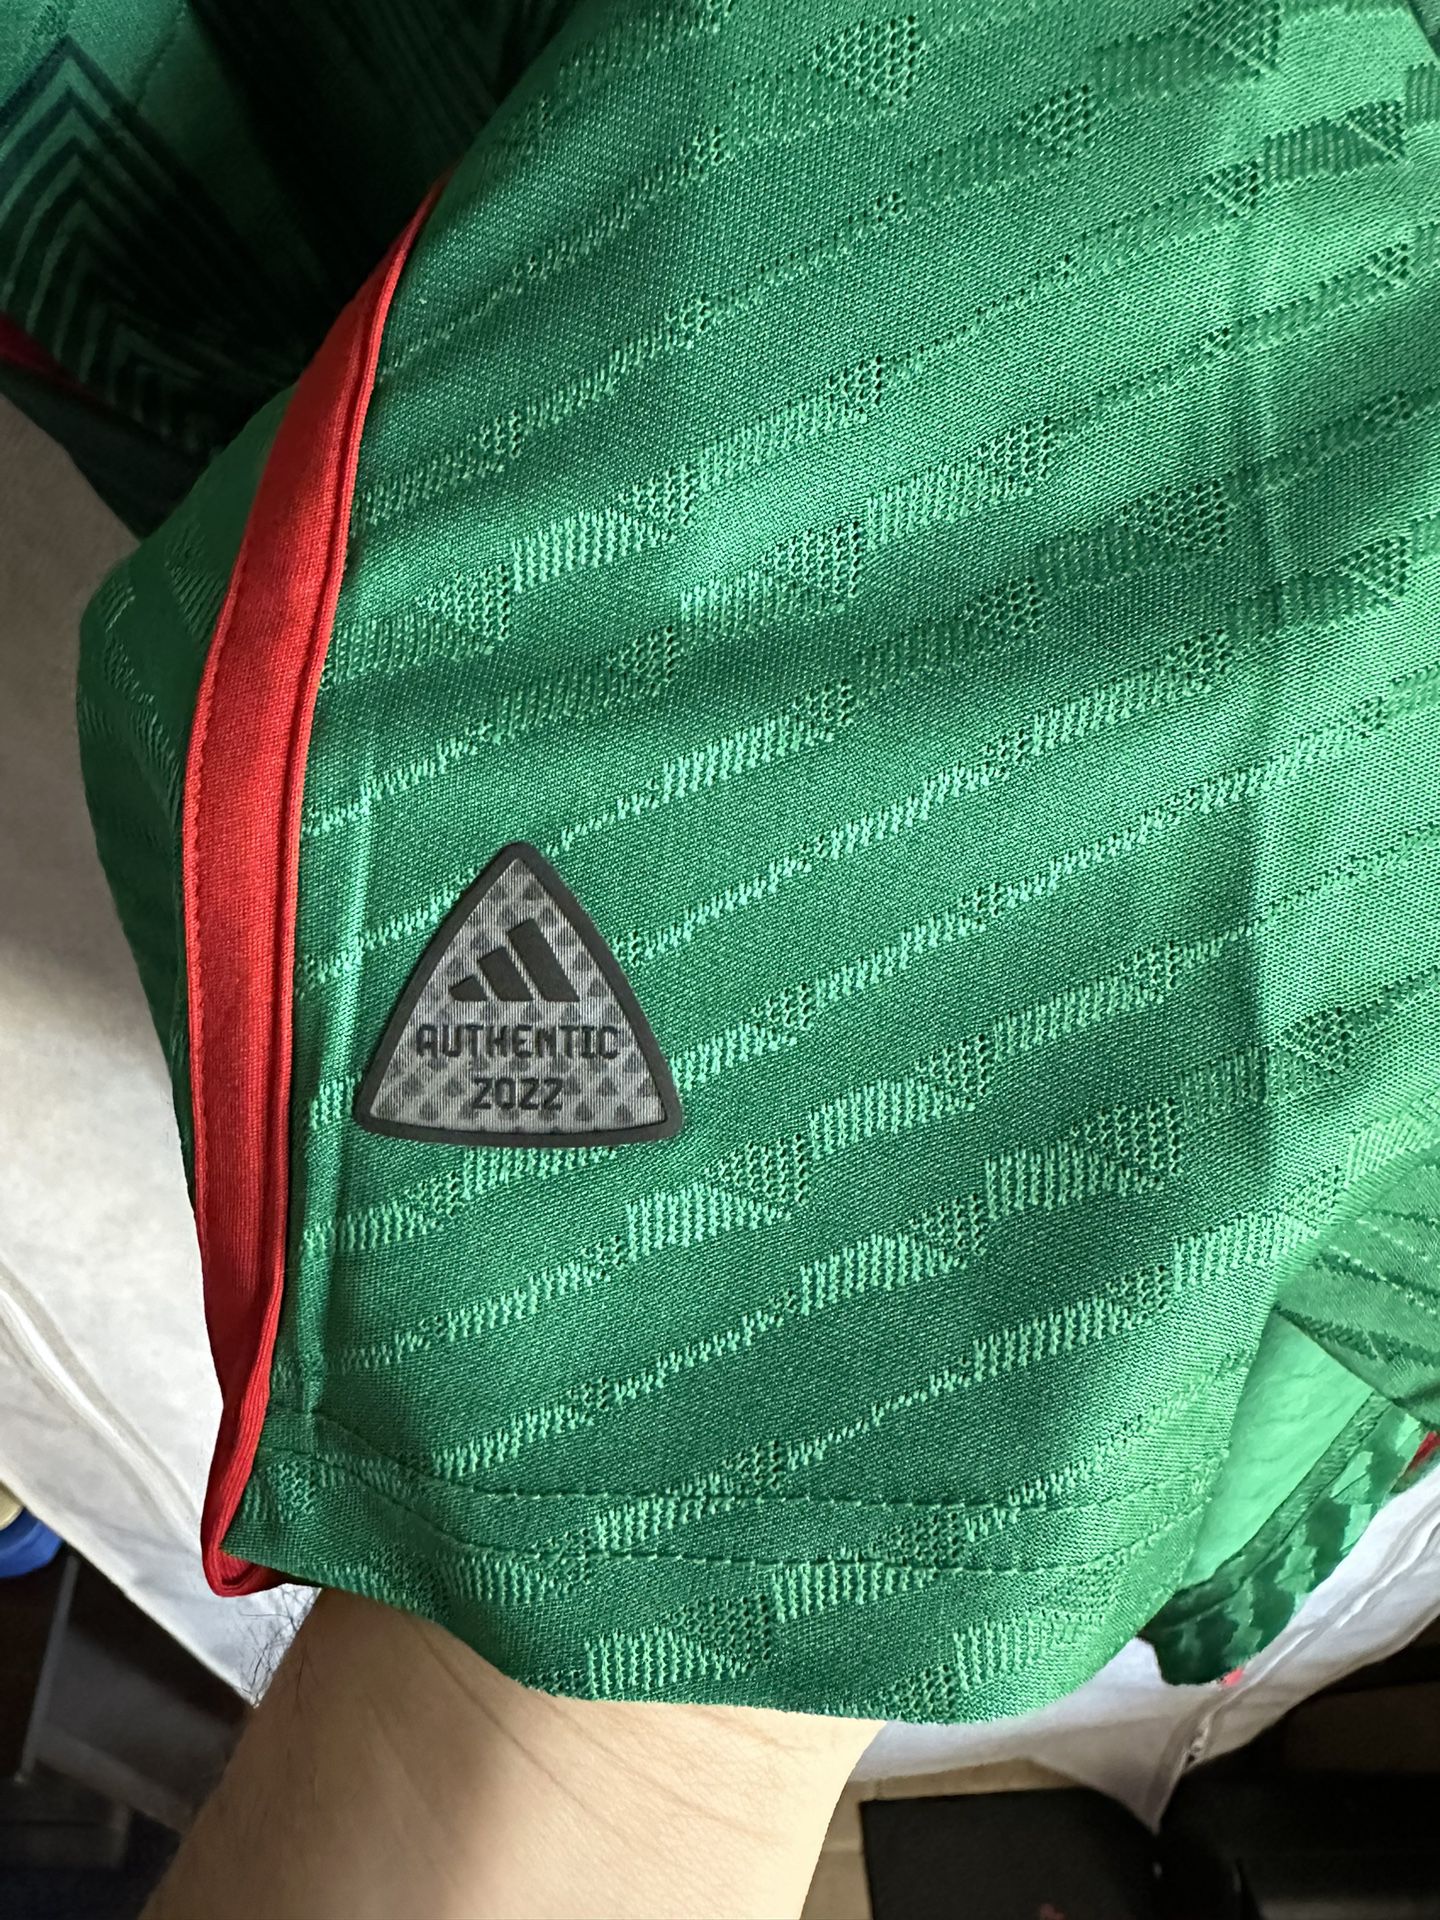 1990 Mexico Adidas Authentic Goalkeeper GK New with Tags (L) – Proper Soccer